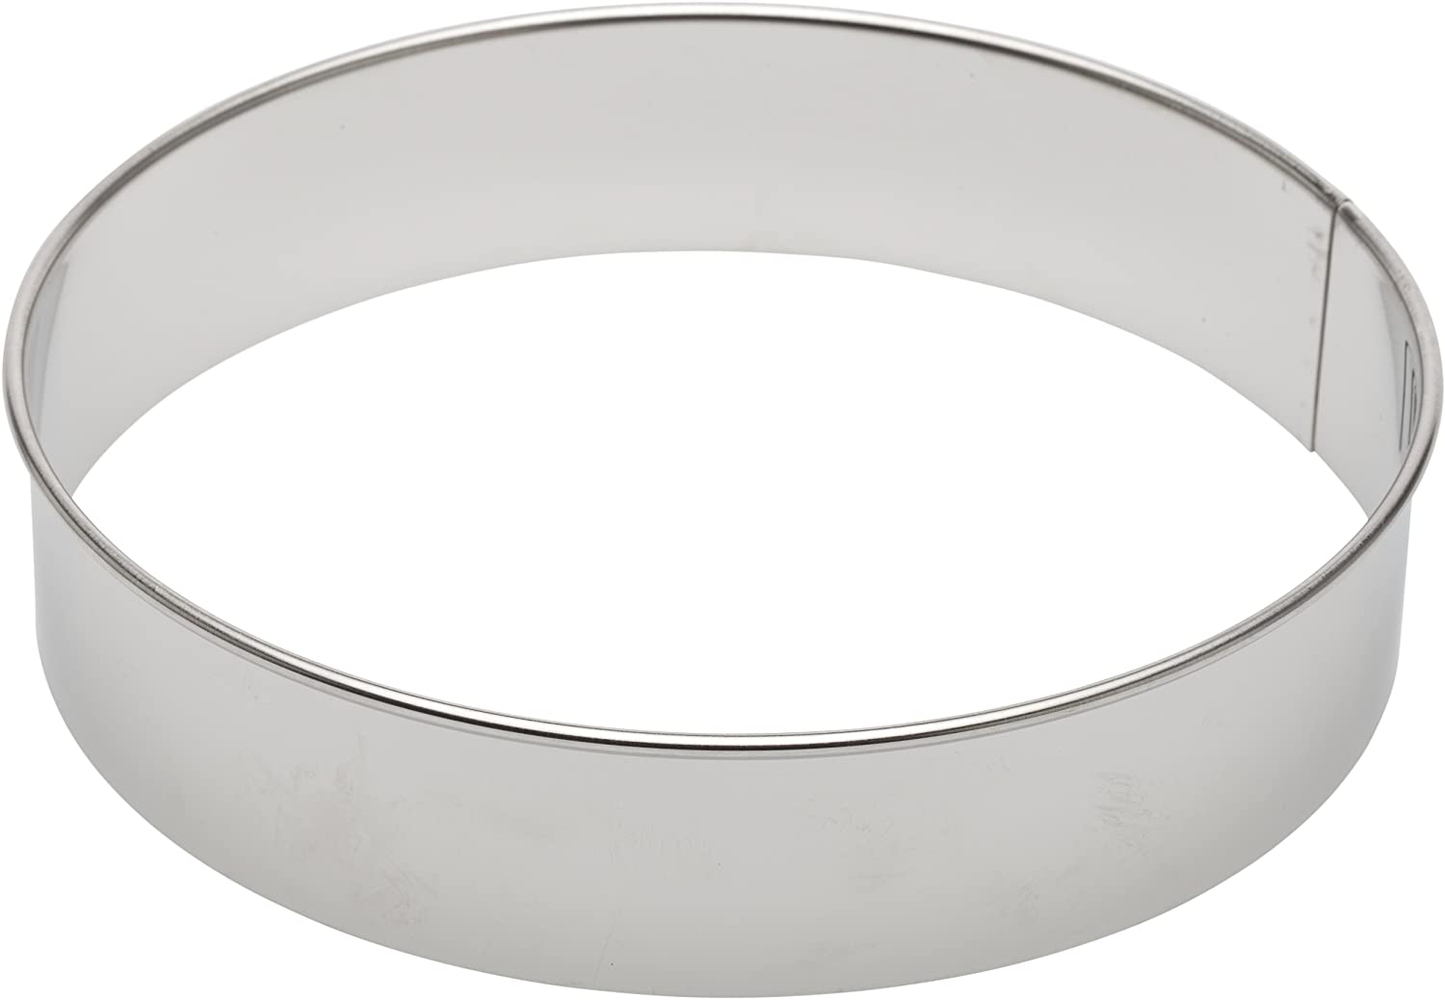 Ateco Food Cutter, 8" Round, Silver